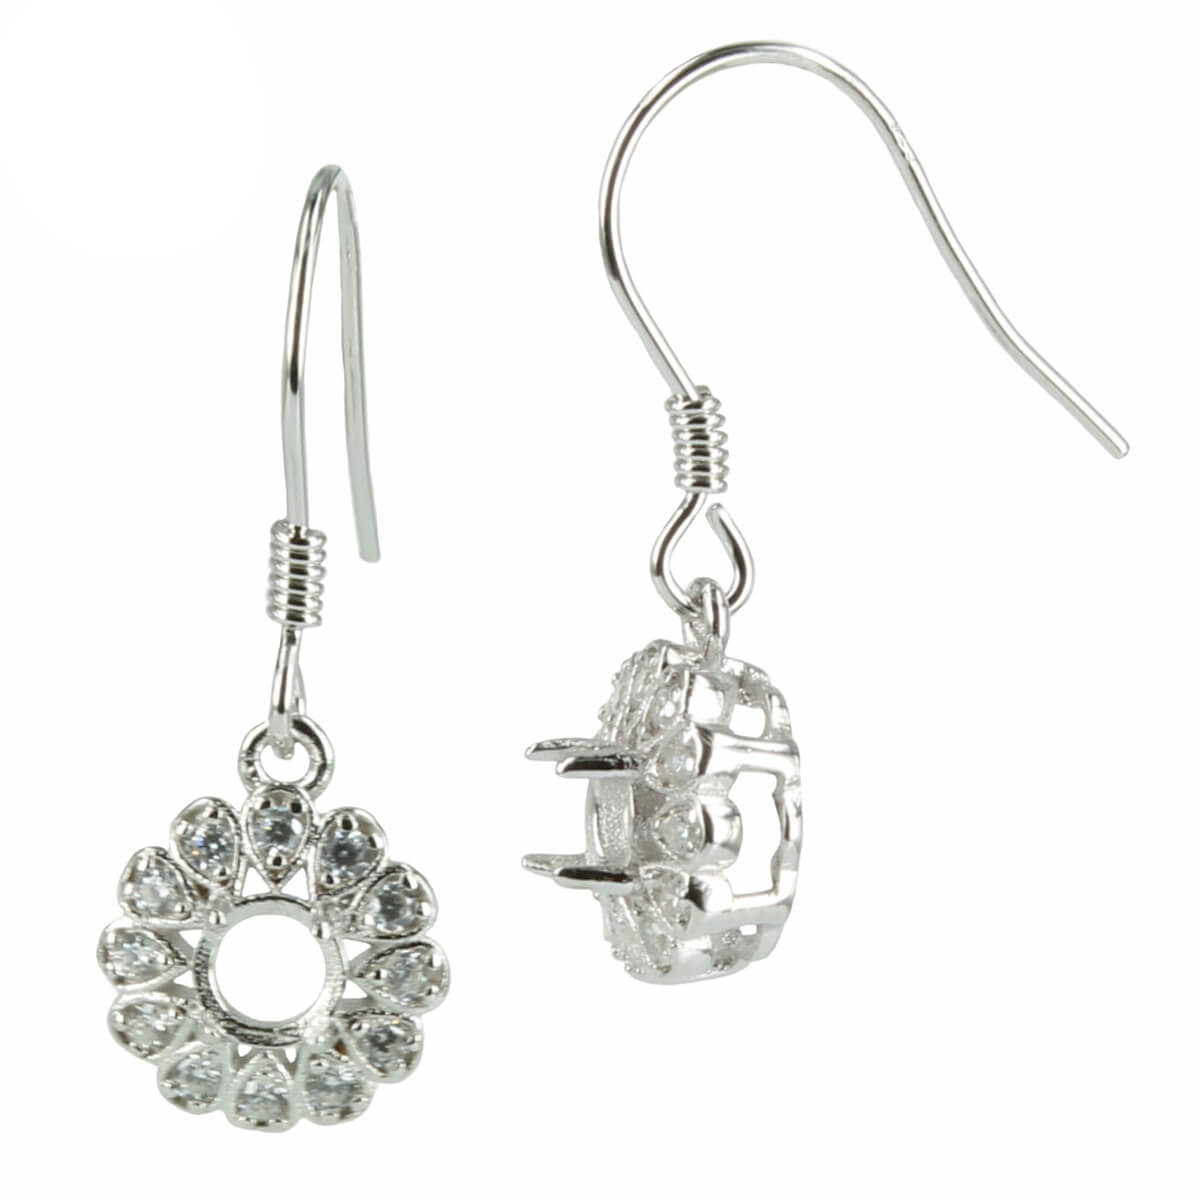 CZ Petals Flower Earrings with Round Setting in Sterling Silver for 4mm Stones 